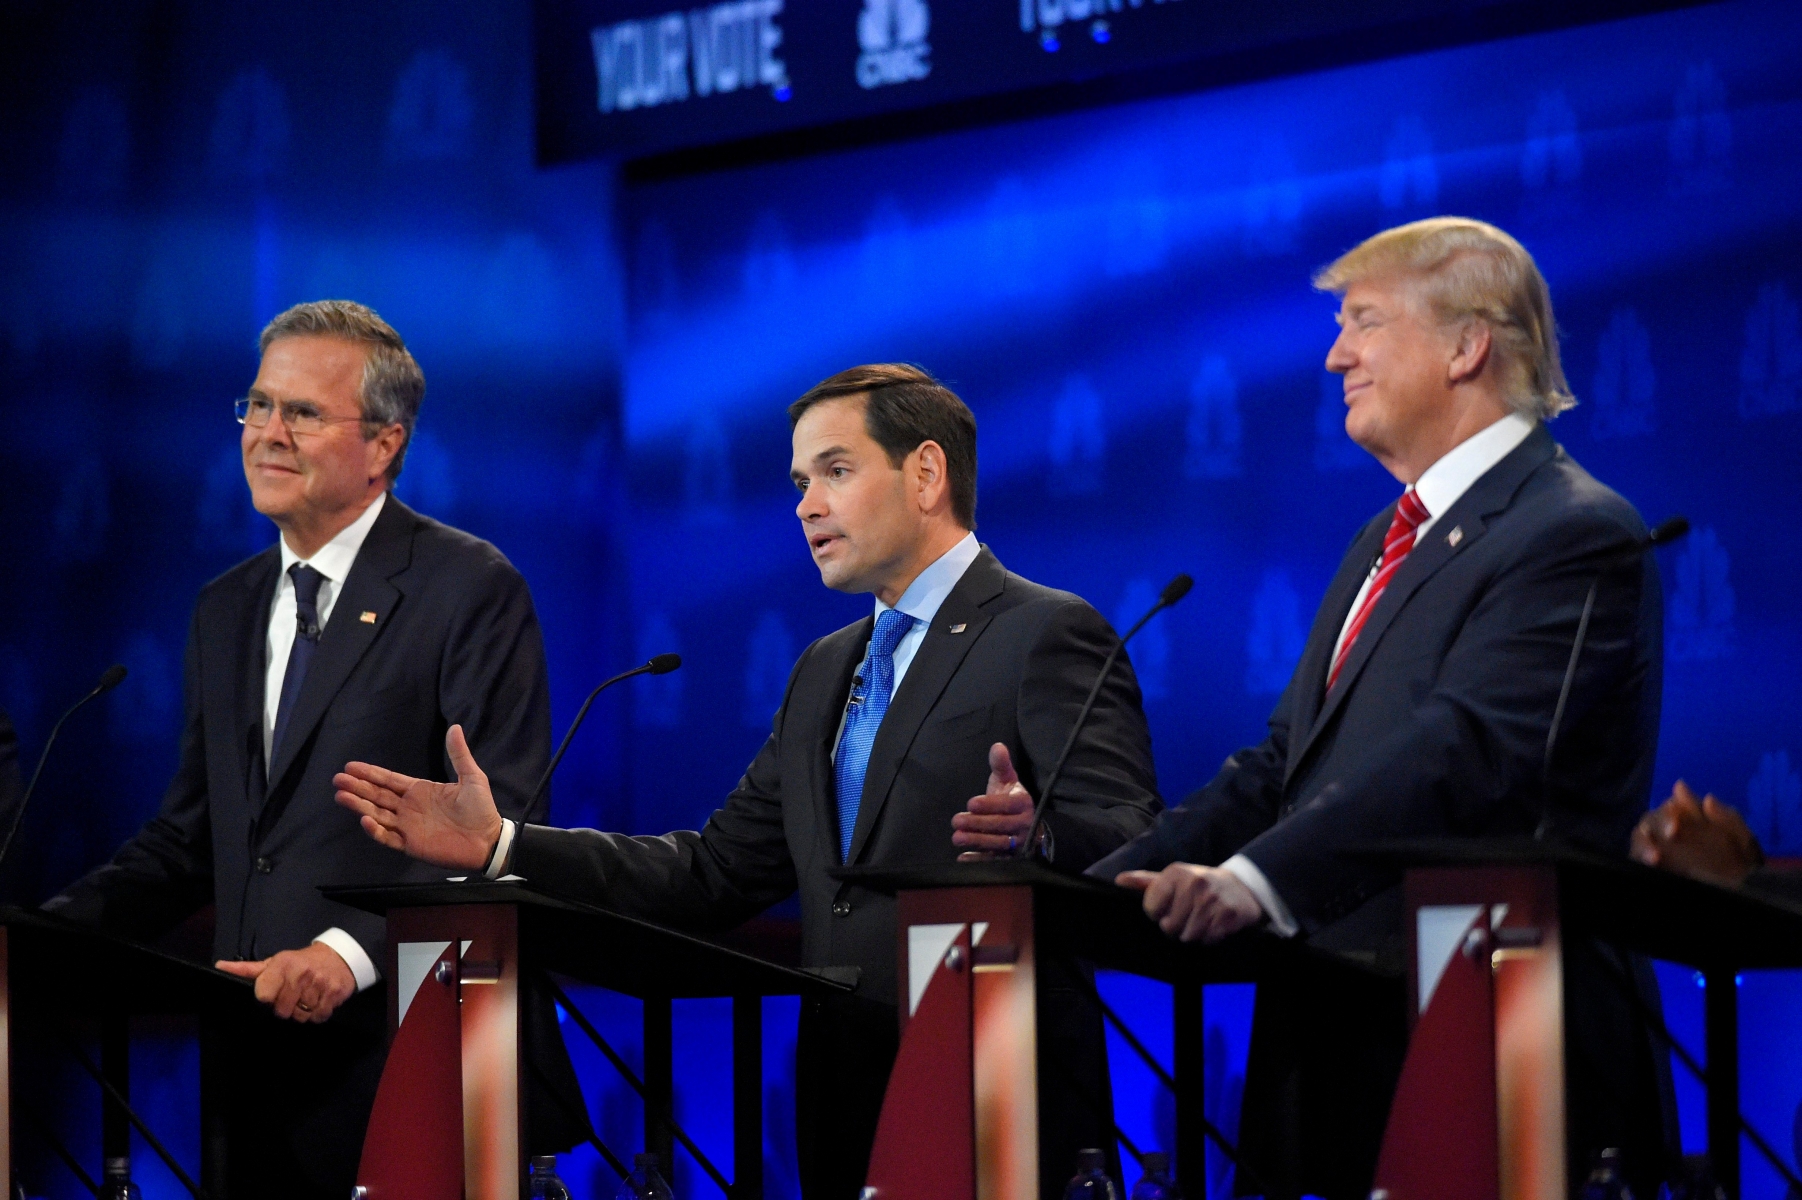 Marco Rubio, center, speaks as Jeb Bush, left, and Donald Trump react during the CNBC Republican presidential debate at the University of Colorado, Wednesday, Oct. 28, 2015, in Boulder, Colo. (AP Photo/Mark J. Terrill) GOP 2016 Debate